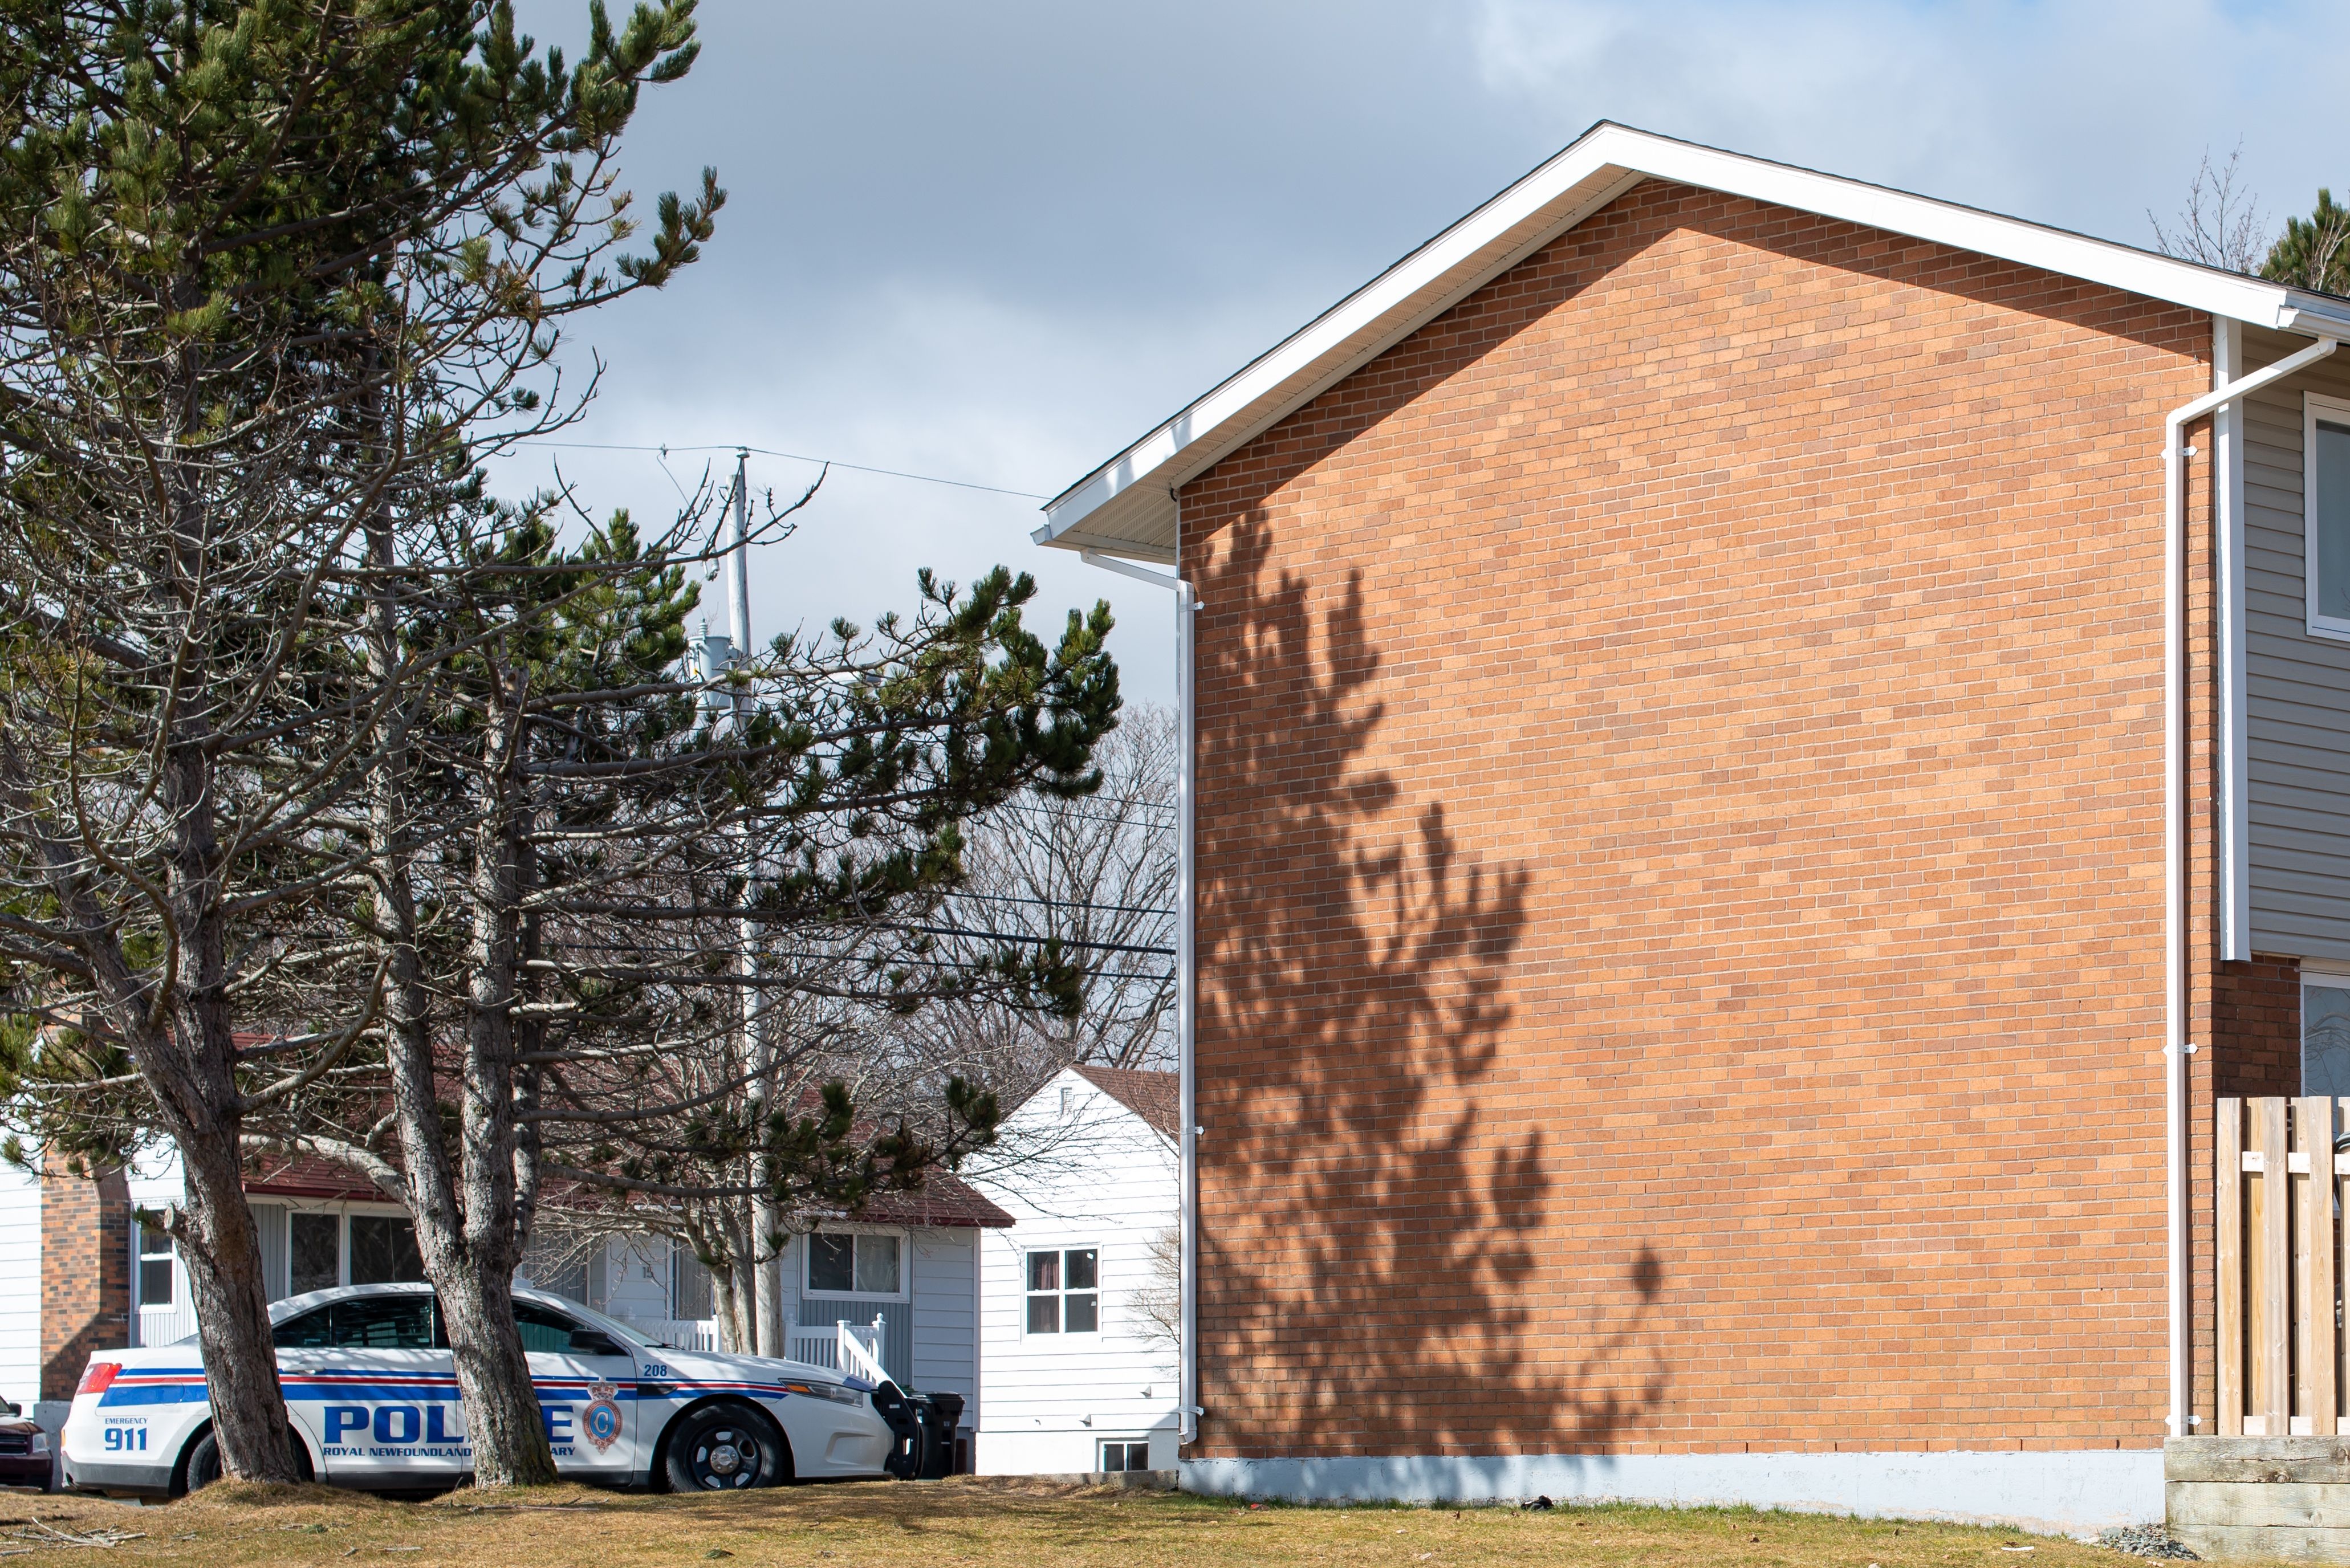 Police vehicle parked next to a multi storey brick building. | Source: Shutterstock